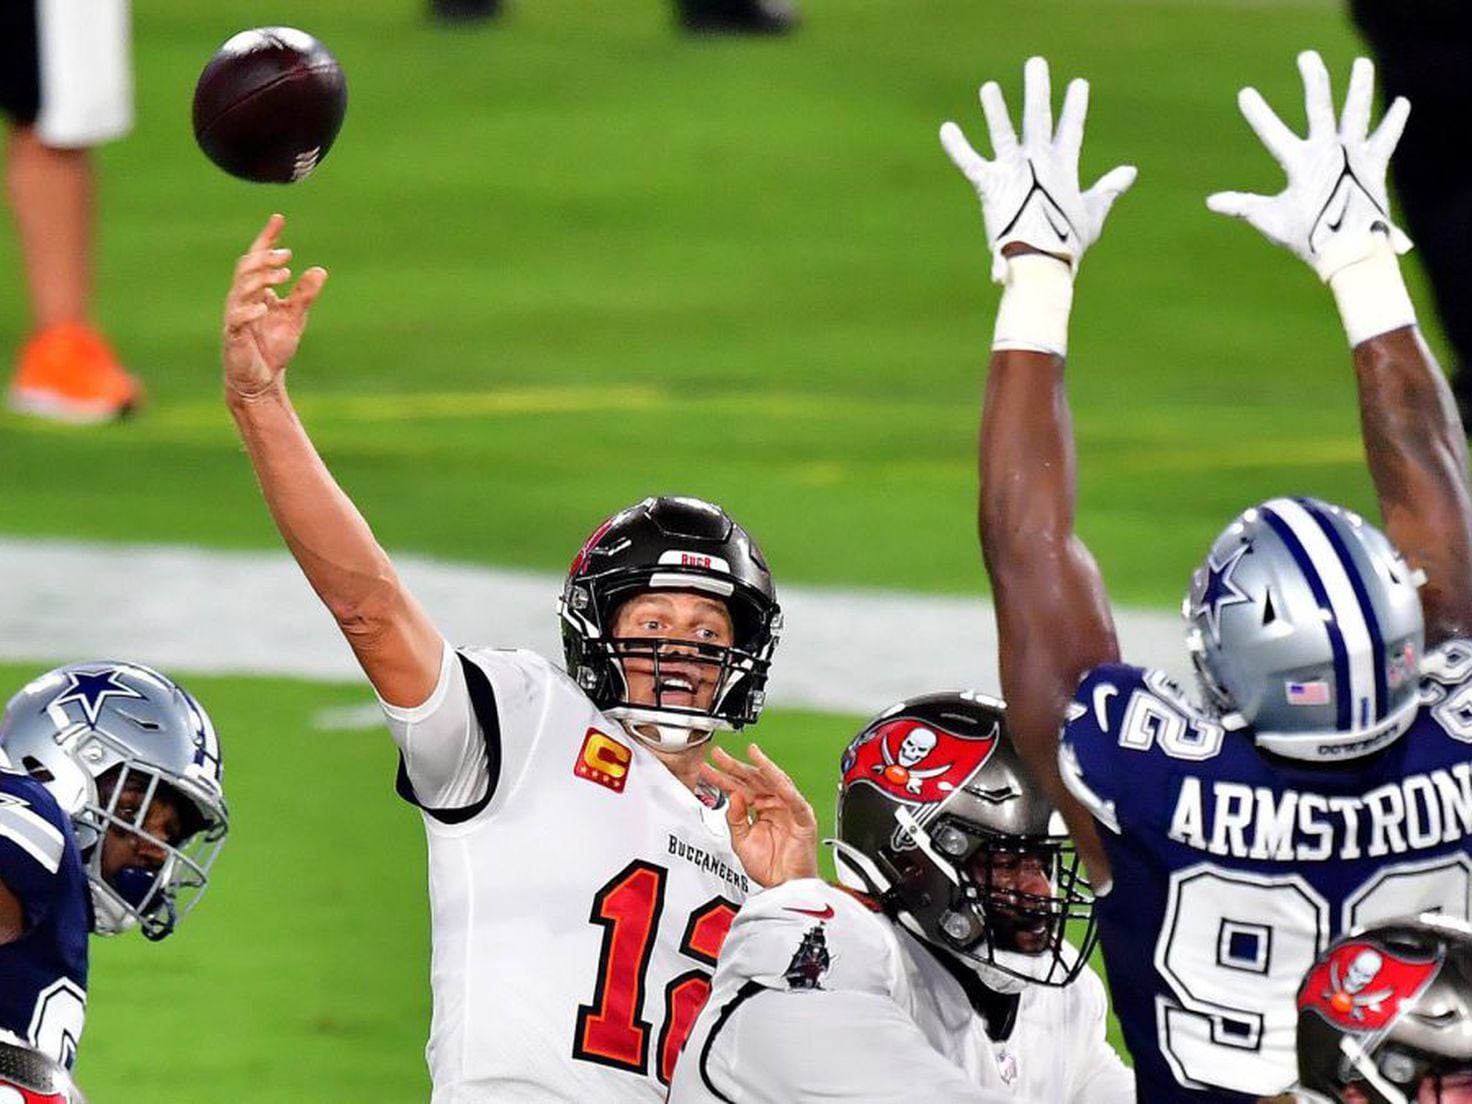 Full highlights and recap of Cowboys win over Buccaneers in NFC